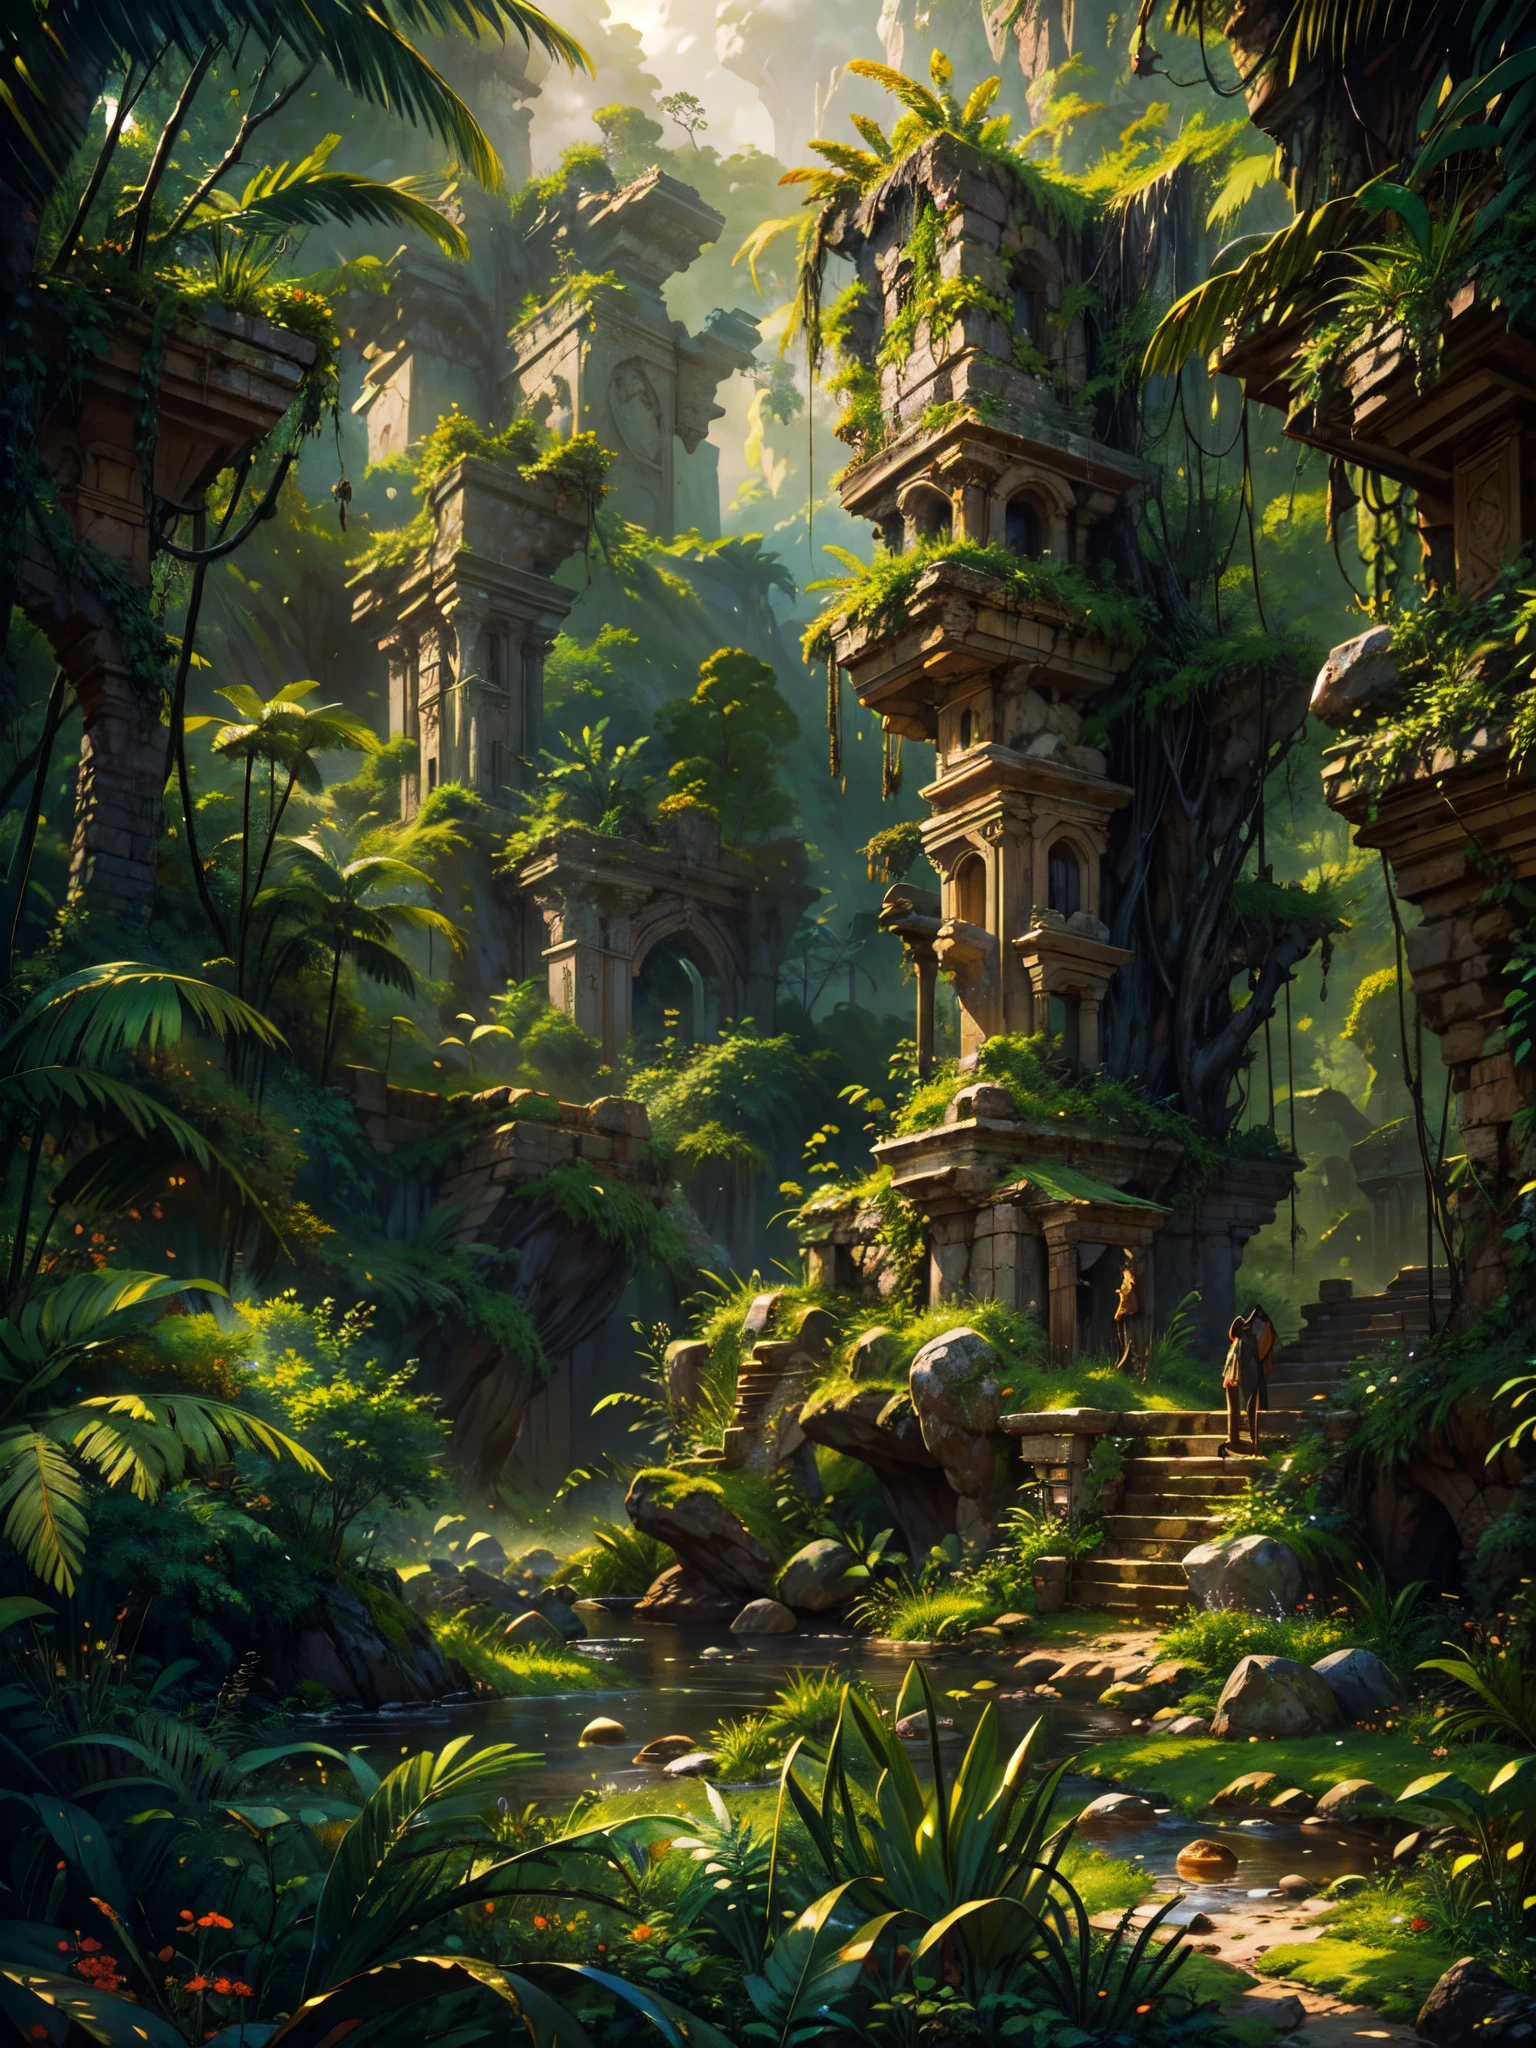 (best quality,highres,masterpiece:1.2),detailed turkey,tropical jungle of stone spikes,richly textured feathers,curious expressions,wild,complex ecosystem,lush green foliage,ancient stone formations,harsh,unforgiving environment,mysterious atmosphere,lively,active subjects,harmonious interaction,clashing textures,contrast between soft and hard,ethereal lighting,epic landscape,mesmerizing colors,dramatic composition,artistic portrayal.